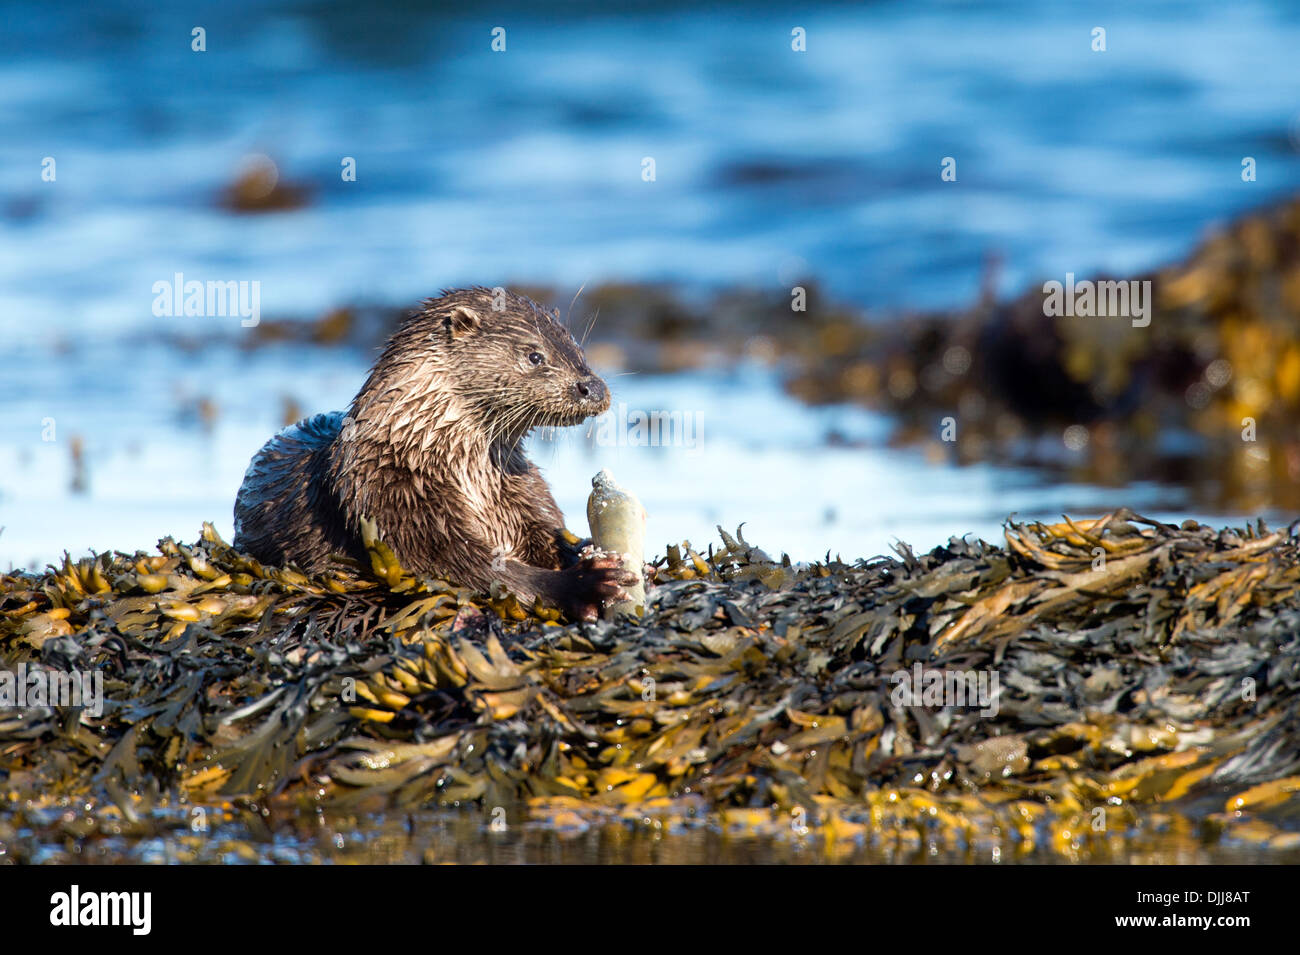 Otter (Lutra lutra), UK Stock Photo